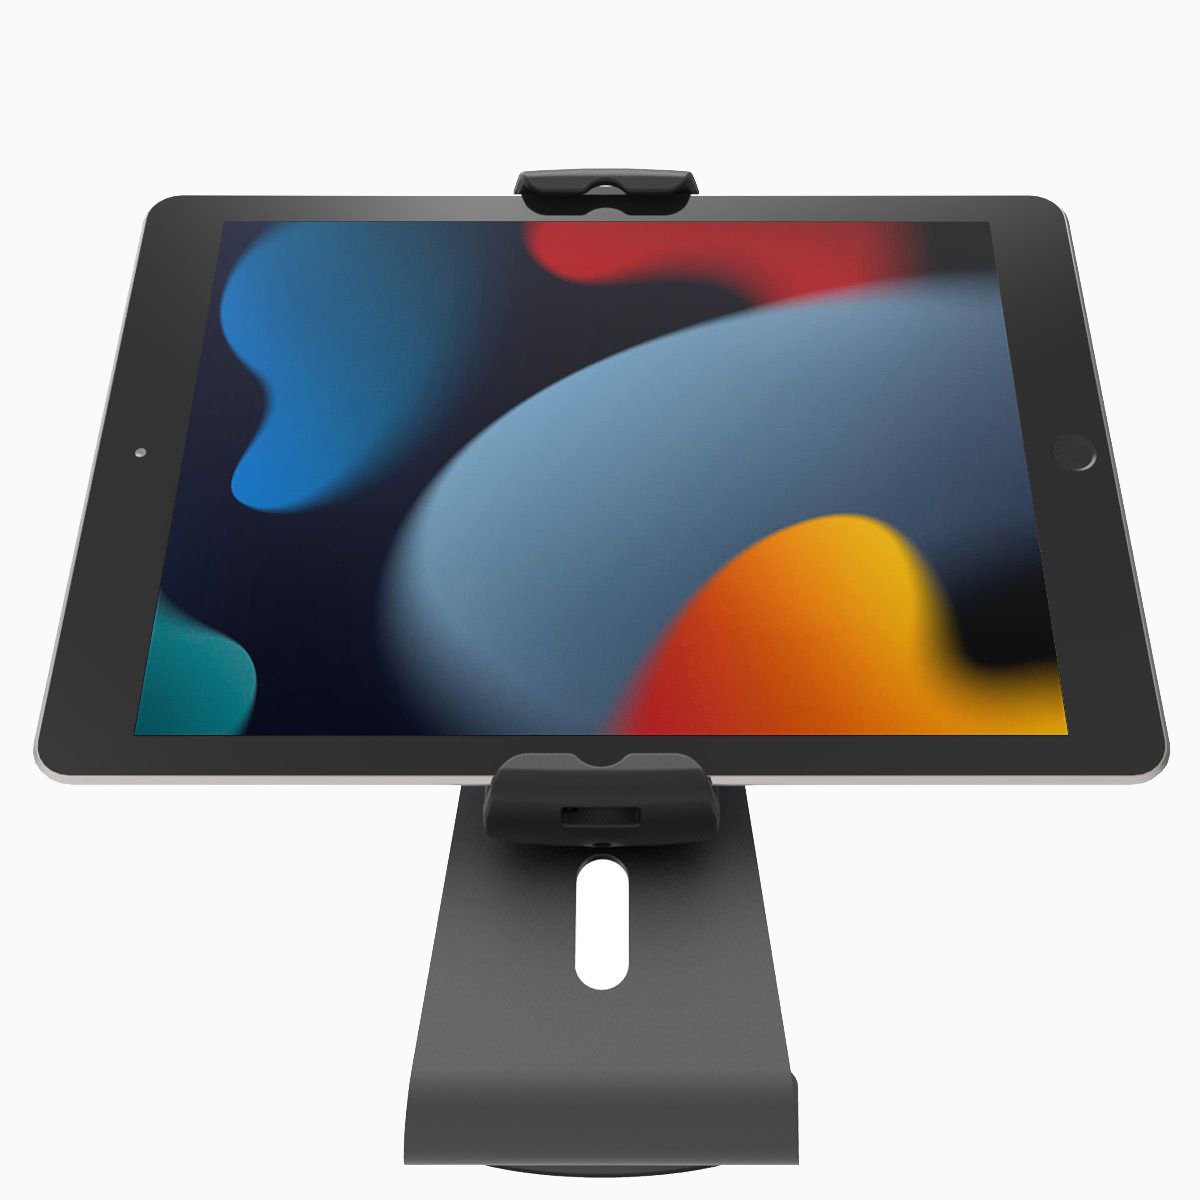 Maclocks Universal Tablet Security Stand – Cling Stand